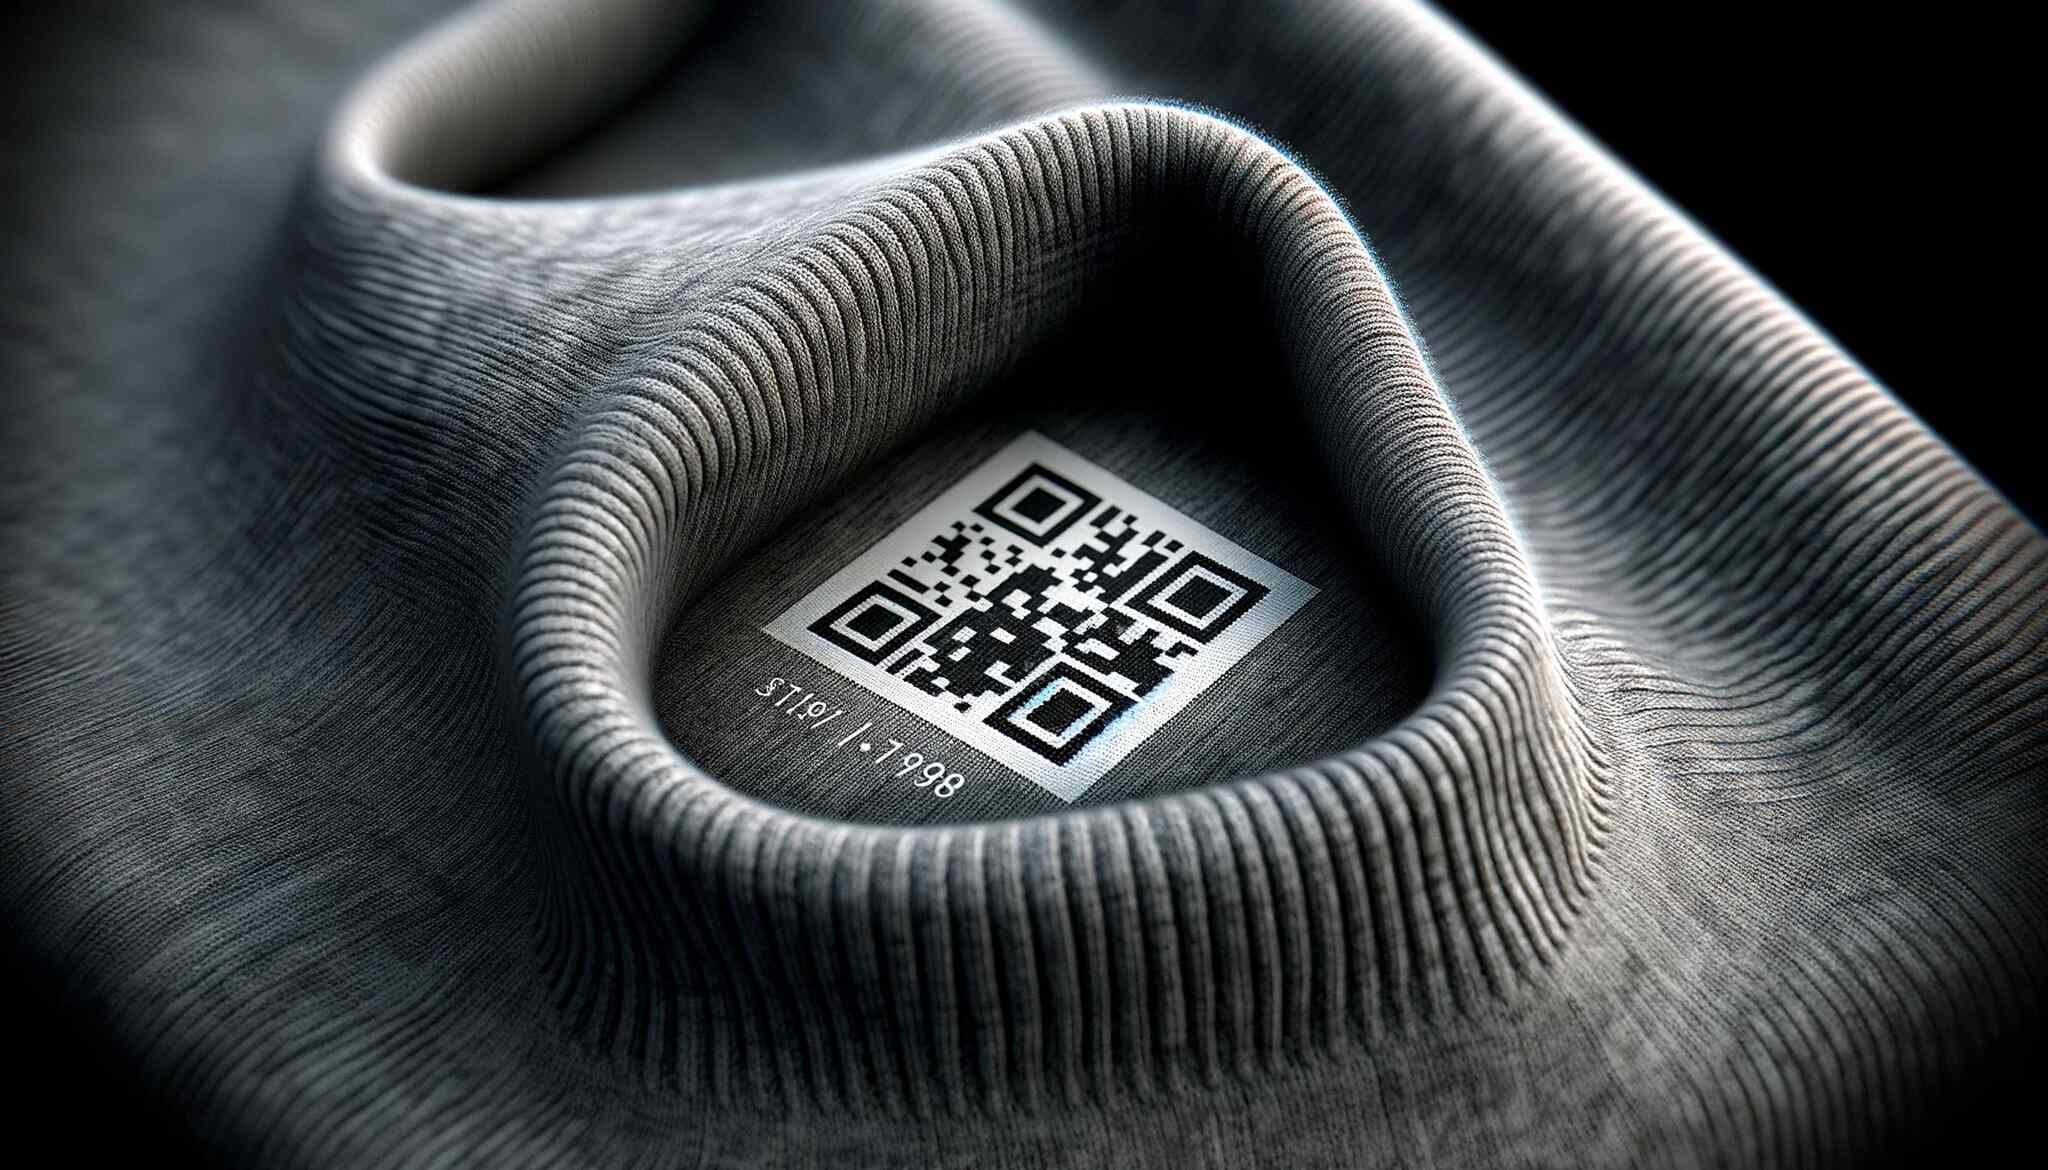 close-up of a piece of clothing showing a small QR code